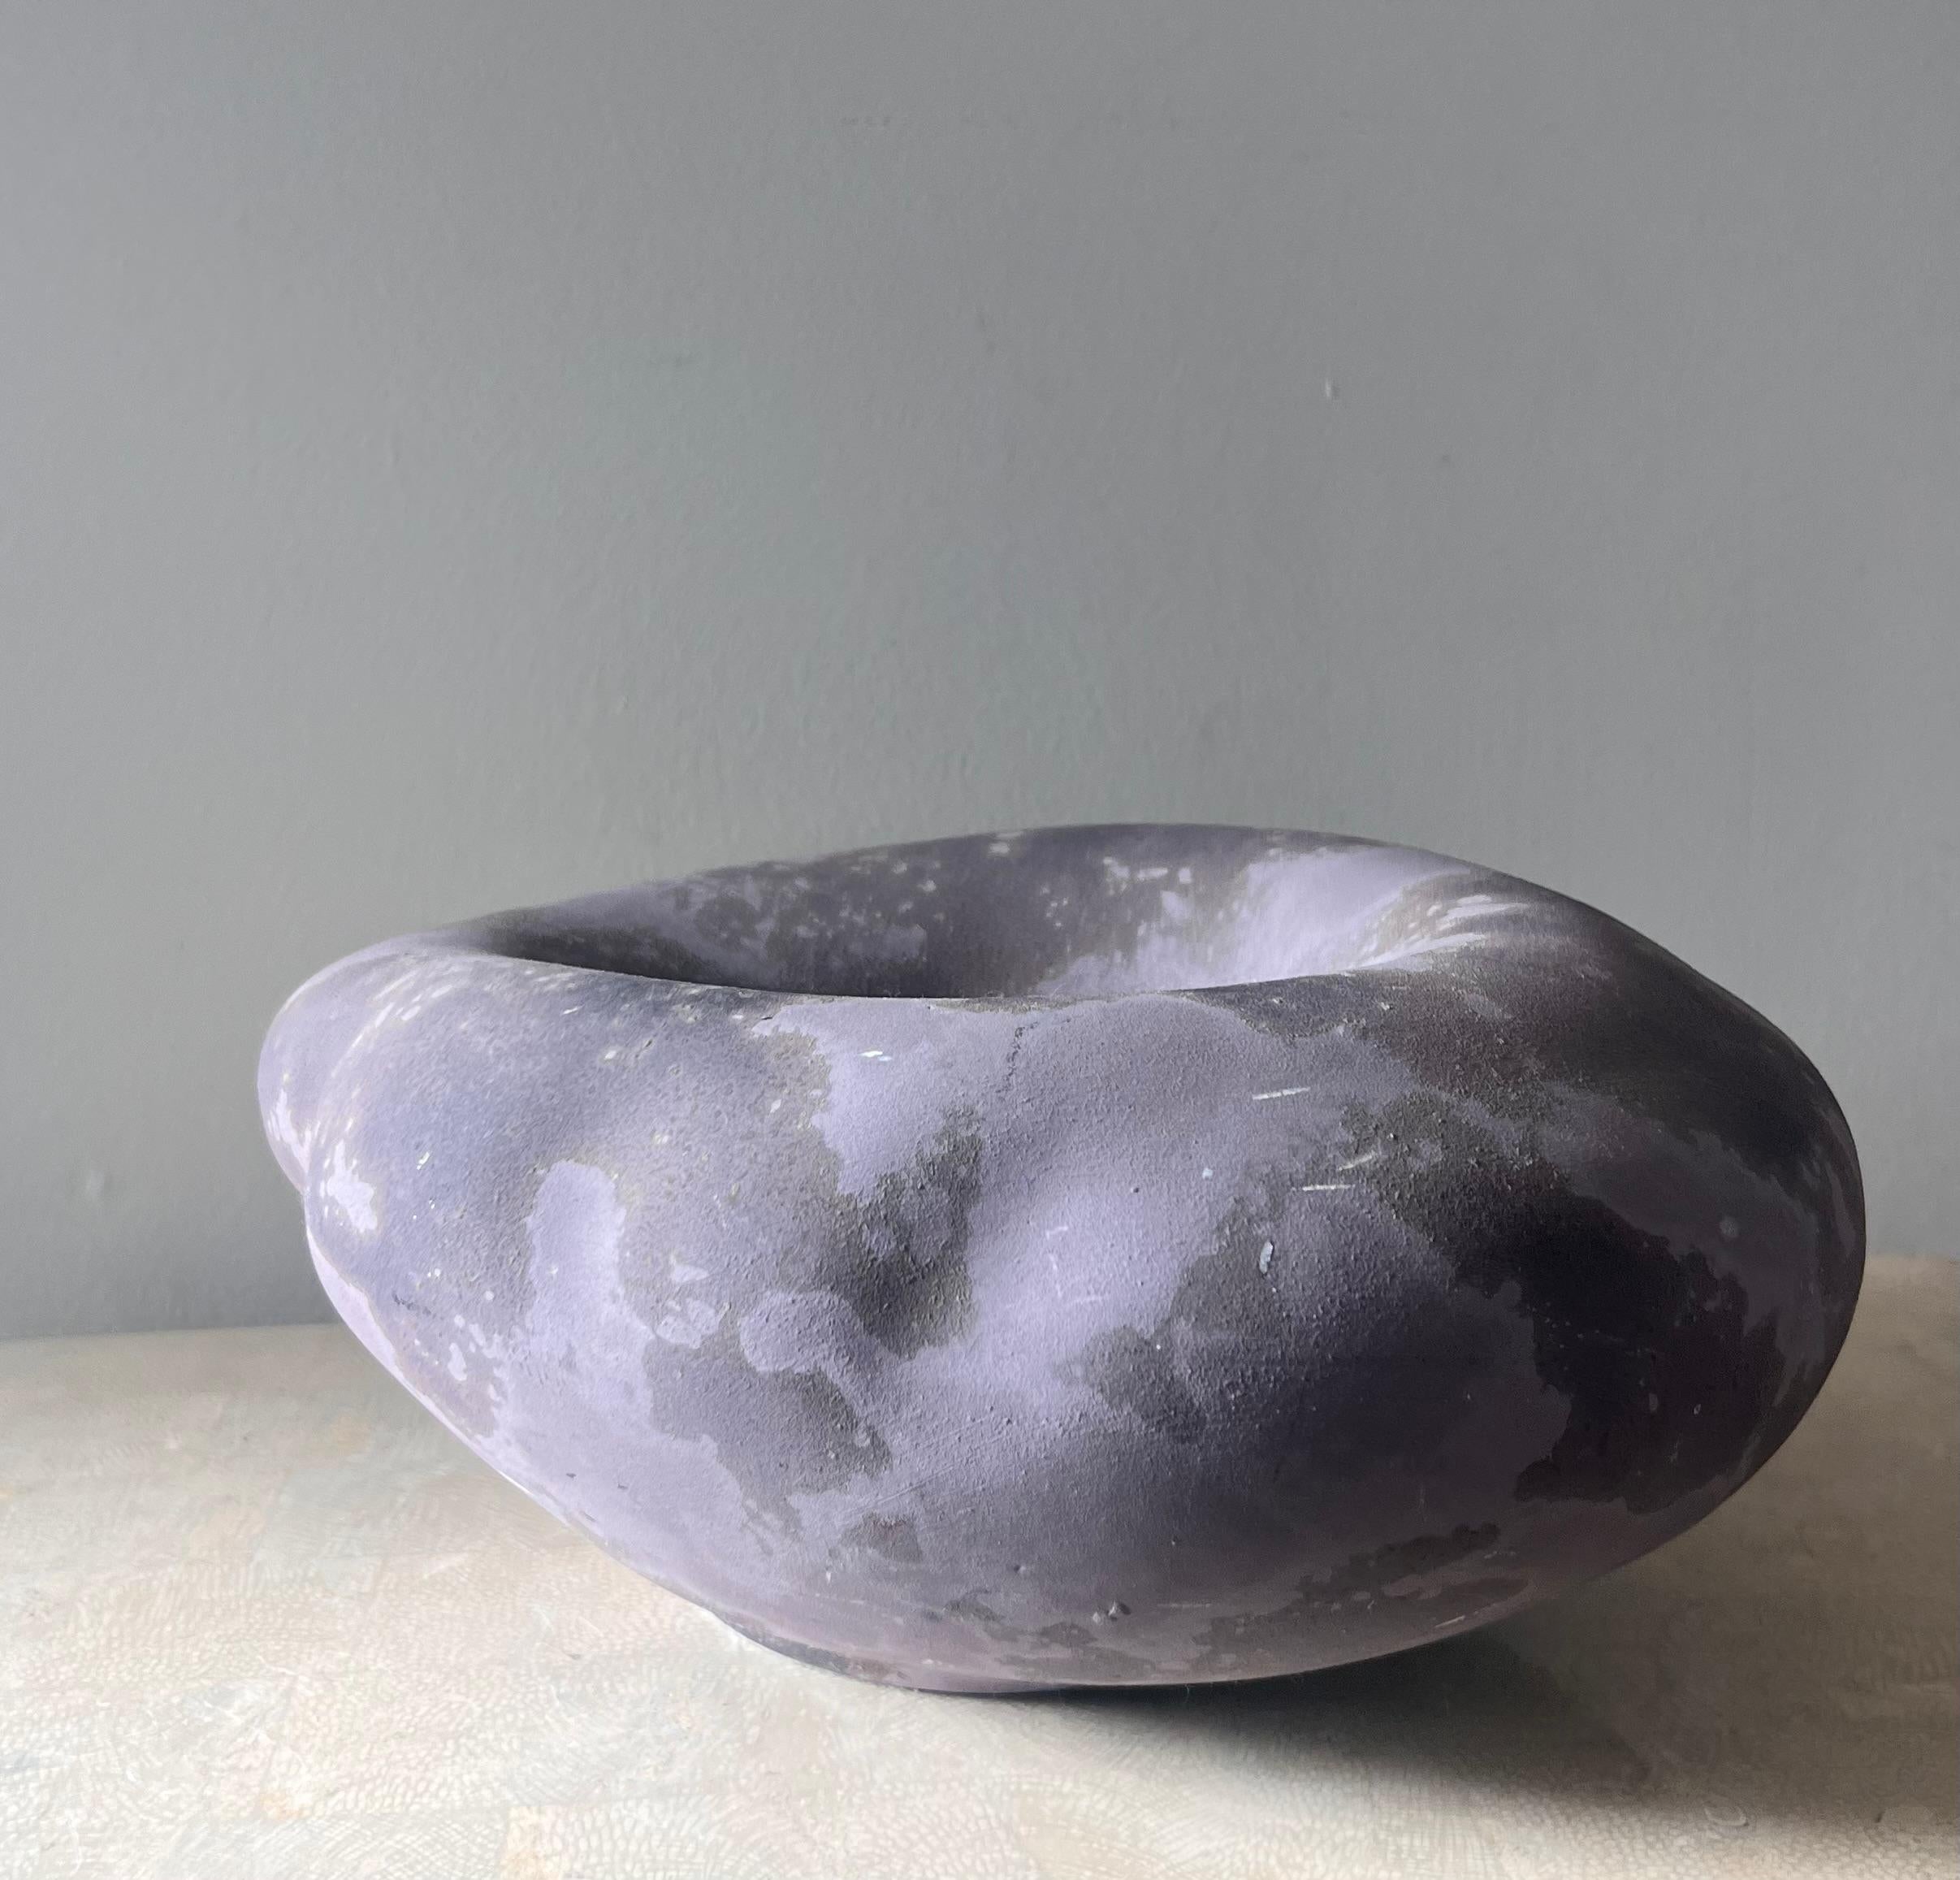 An incredible artpiece raku pottery centerpiece by Tony Evans, signed, early 21st century. In tones of lavender and violet and featuring a raw rough finish. Great condition with minor scuffing.
12.5” W x 9.5” D x 5.5” H 